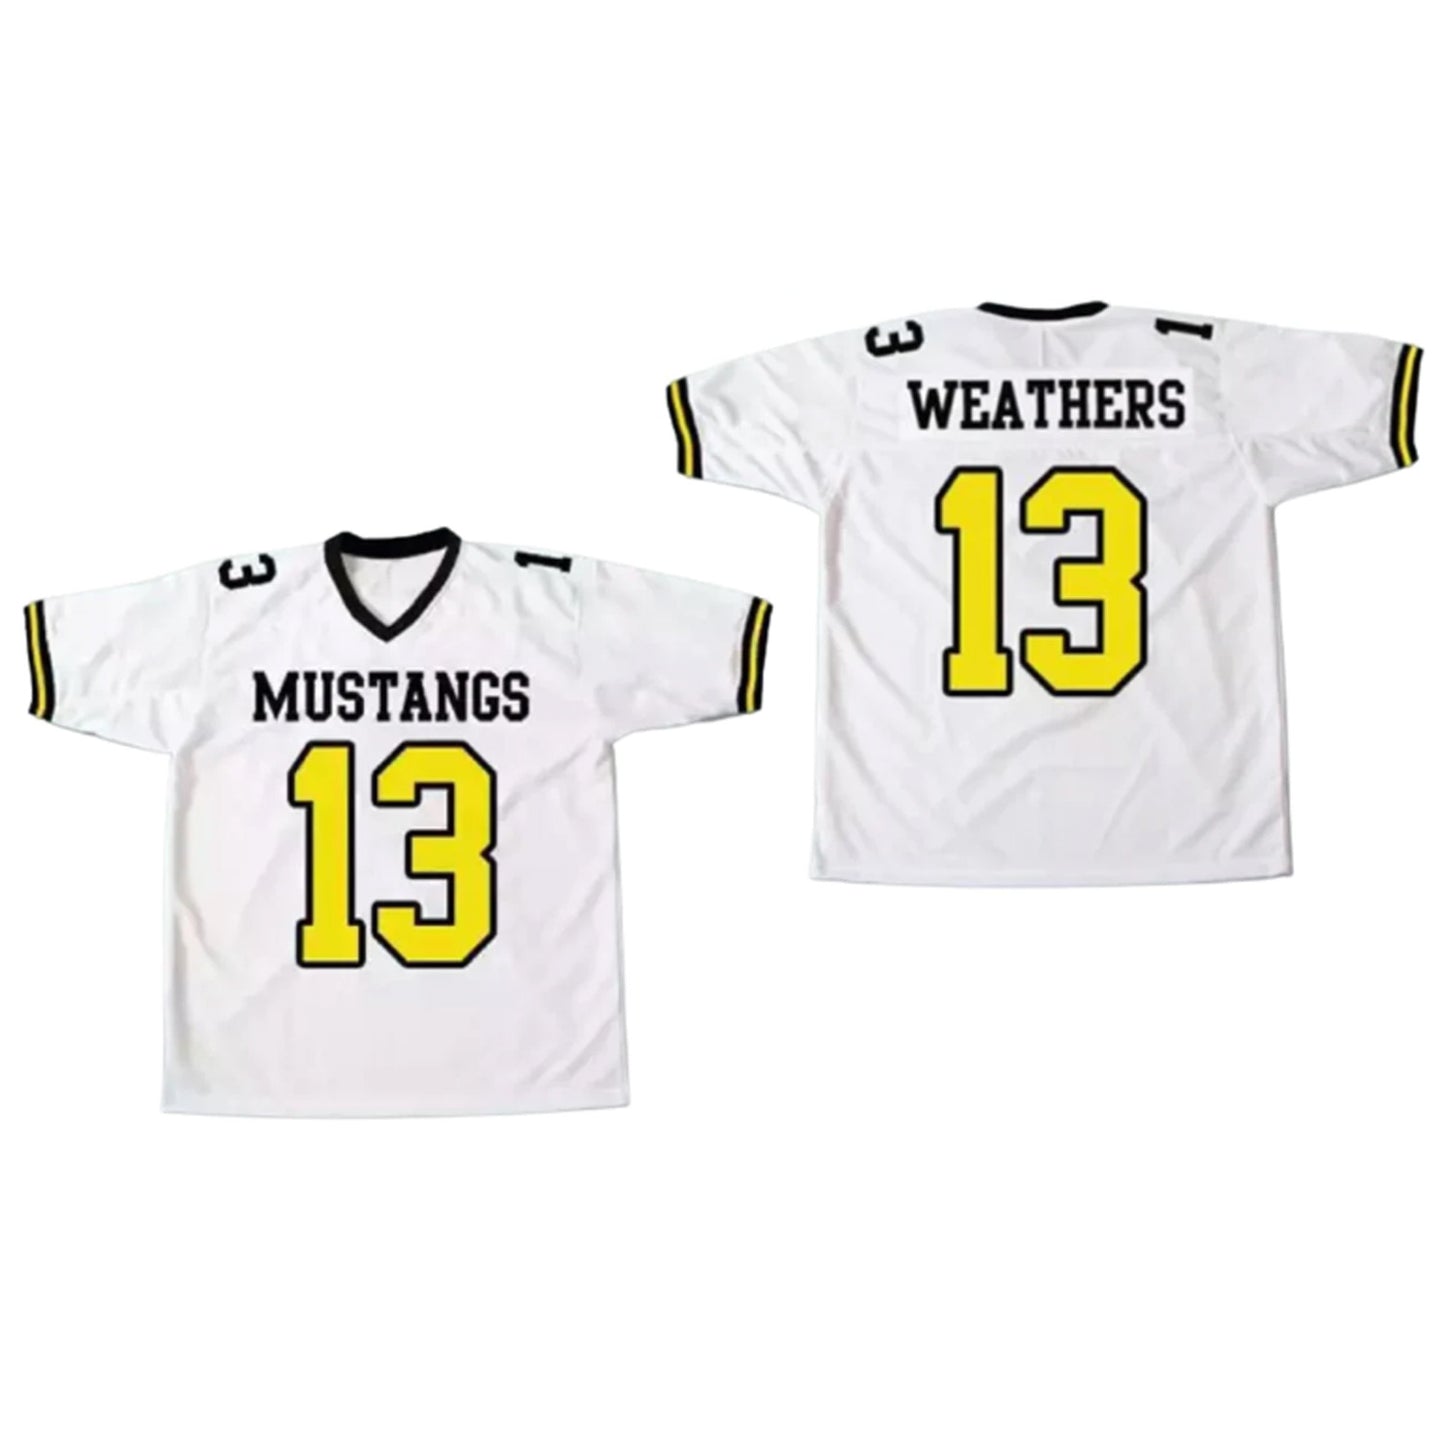 Willie Weathers Mustangs Gridiron Gang Football 13 Jersey